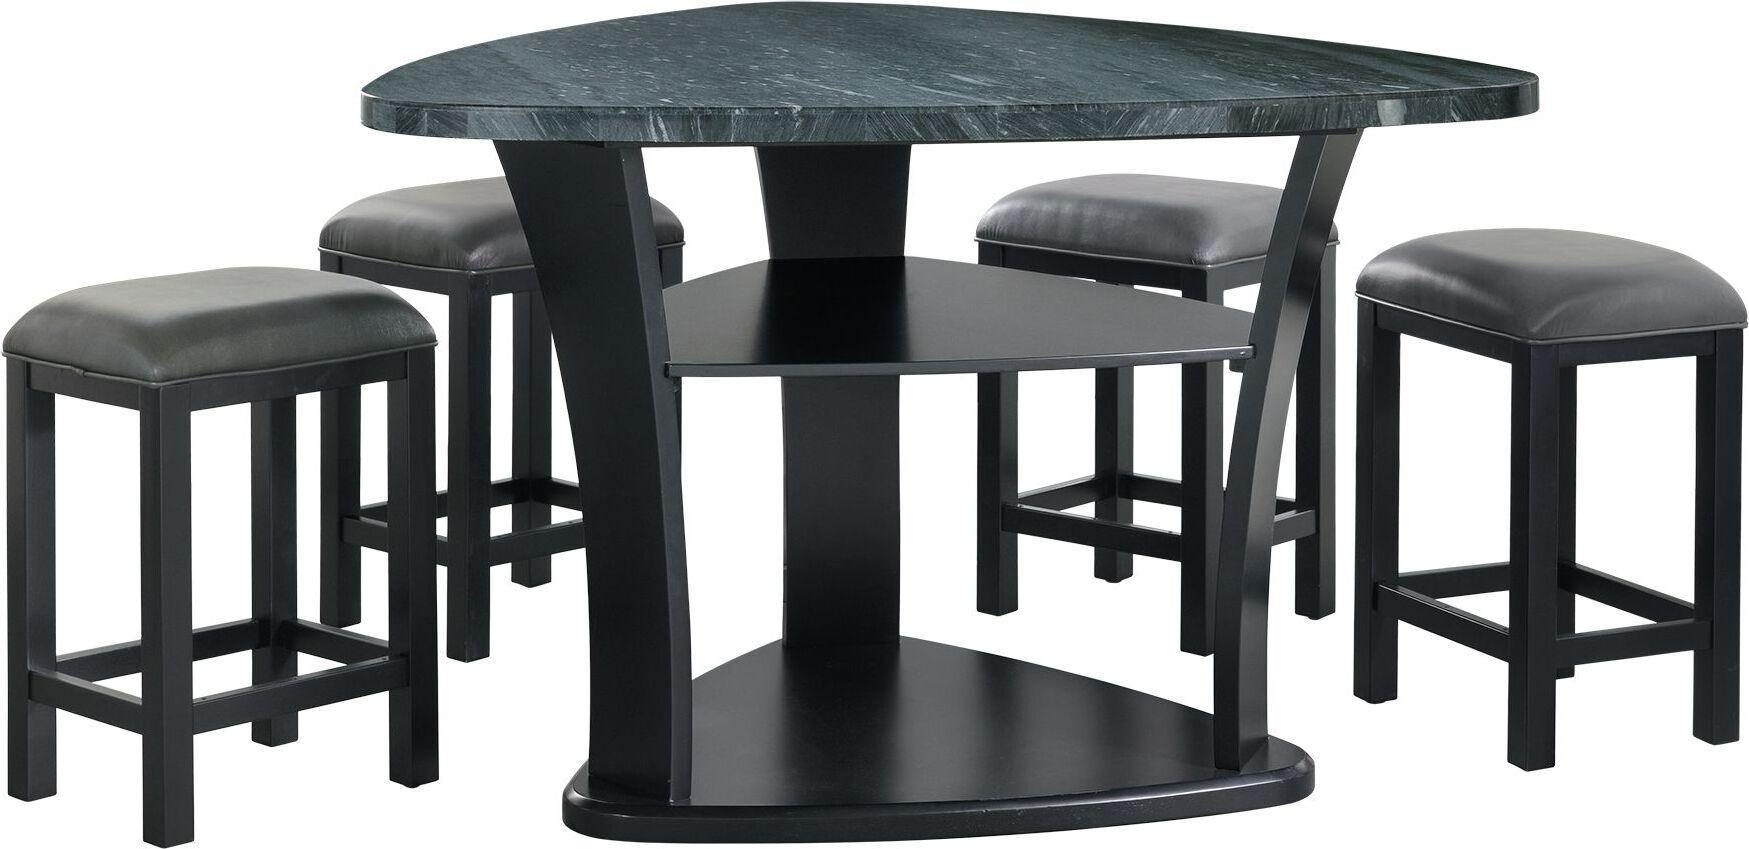 Elements Dining Sets - Colton 5PC Counter Height Dining Set in Grey - Table and Four Stools